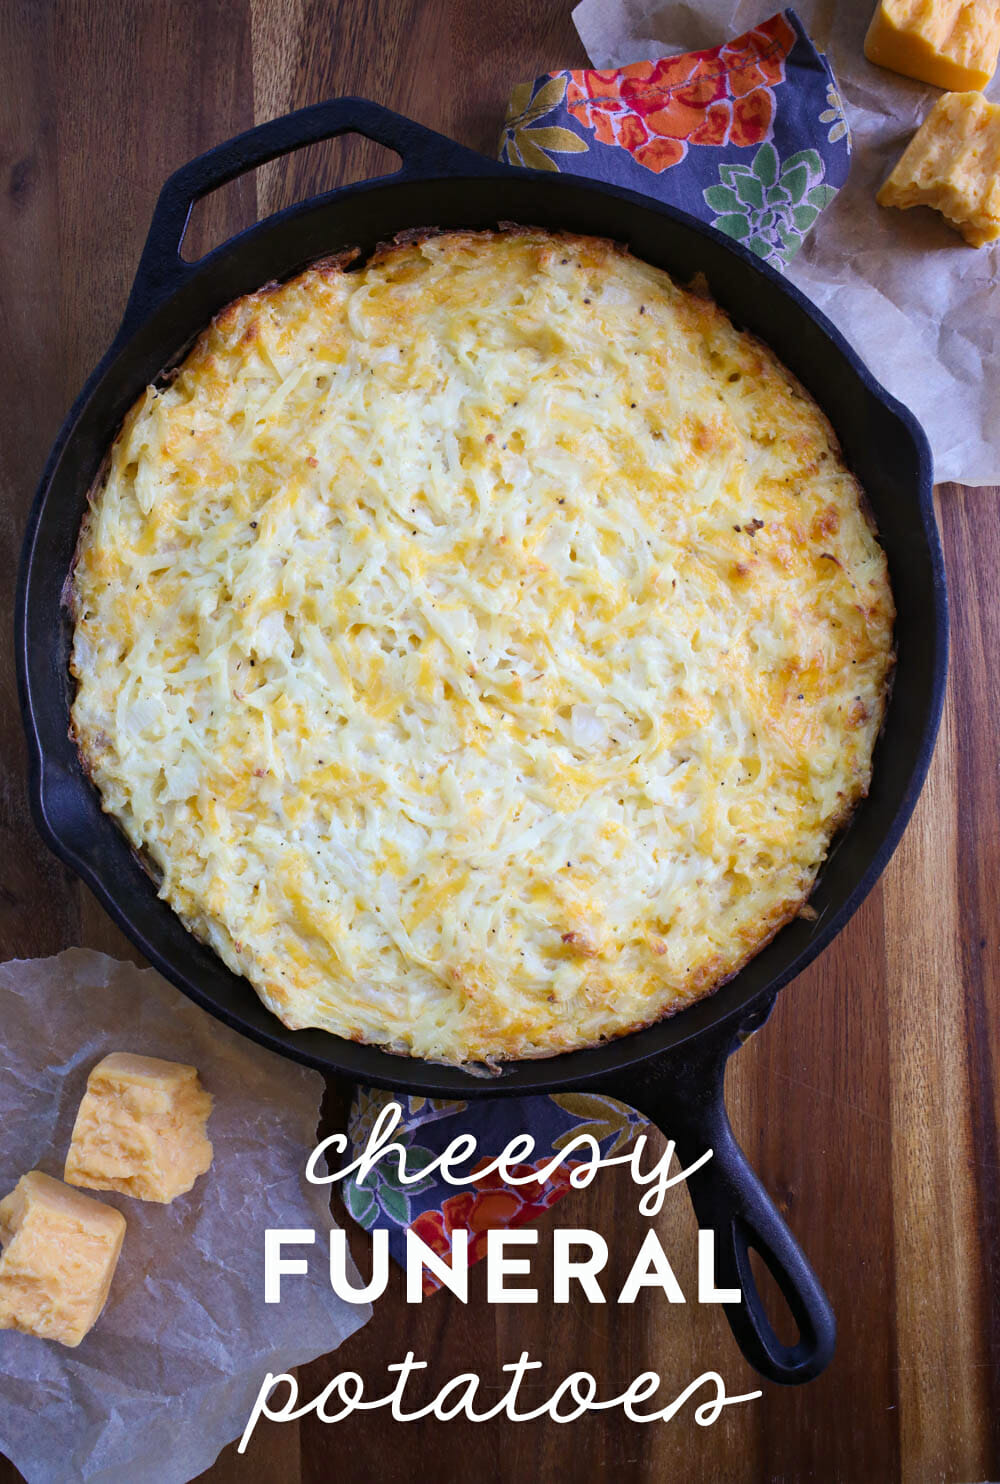 Our Best Bites Cheesy Funeral Potatoes